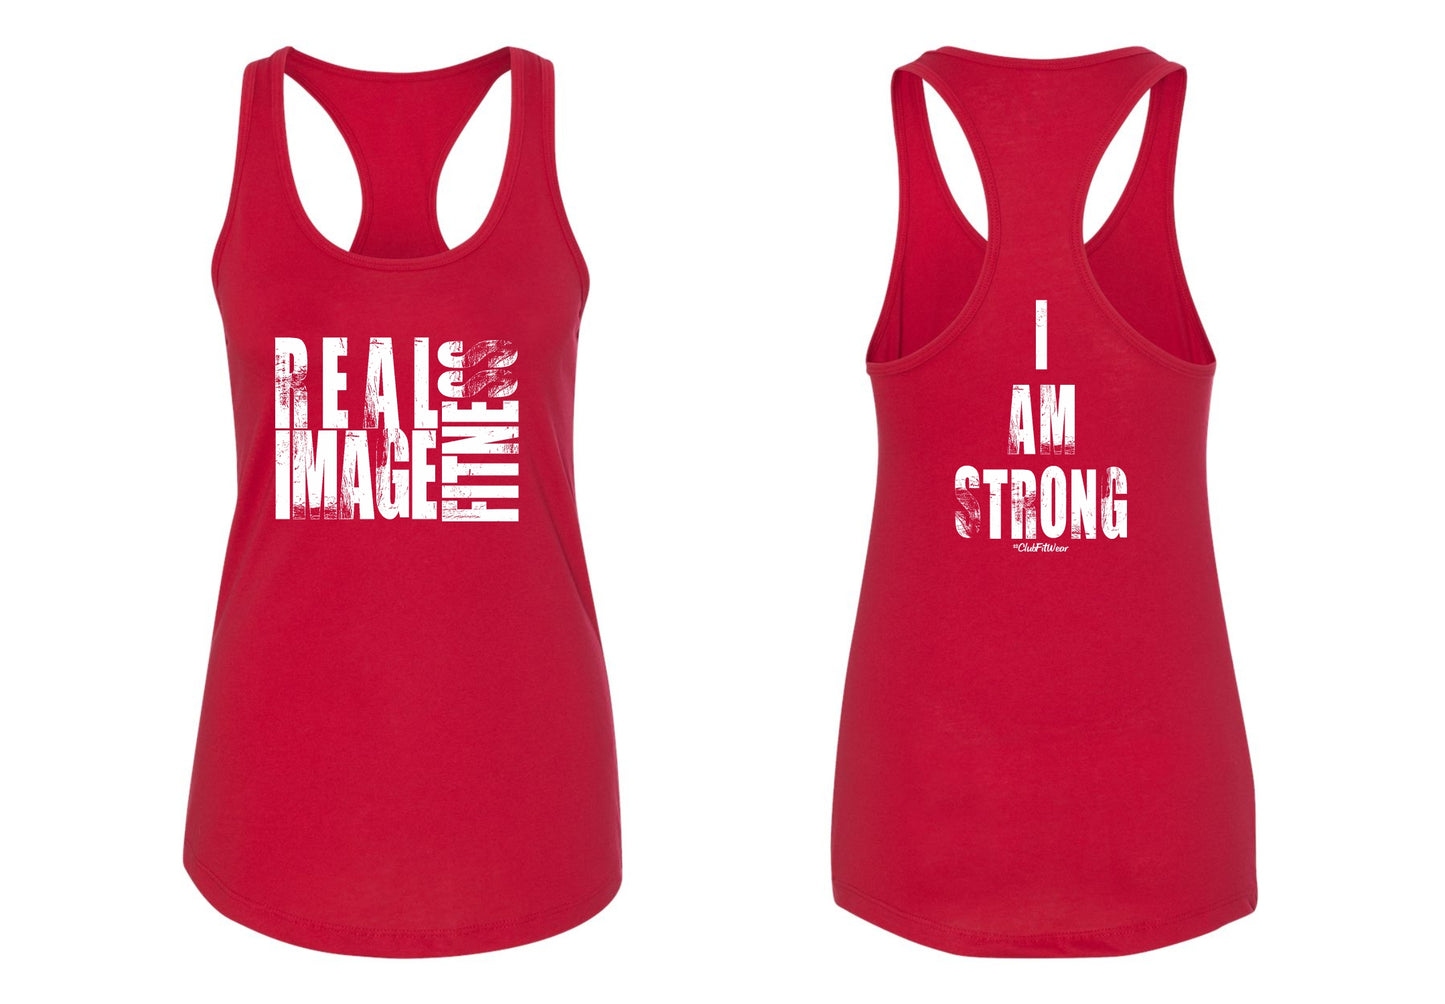 Real Image Fitness - I am Strong